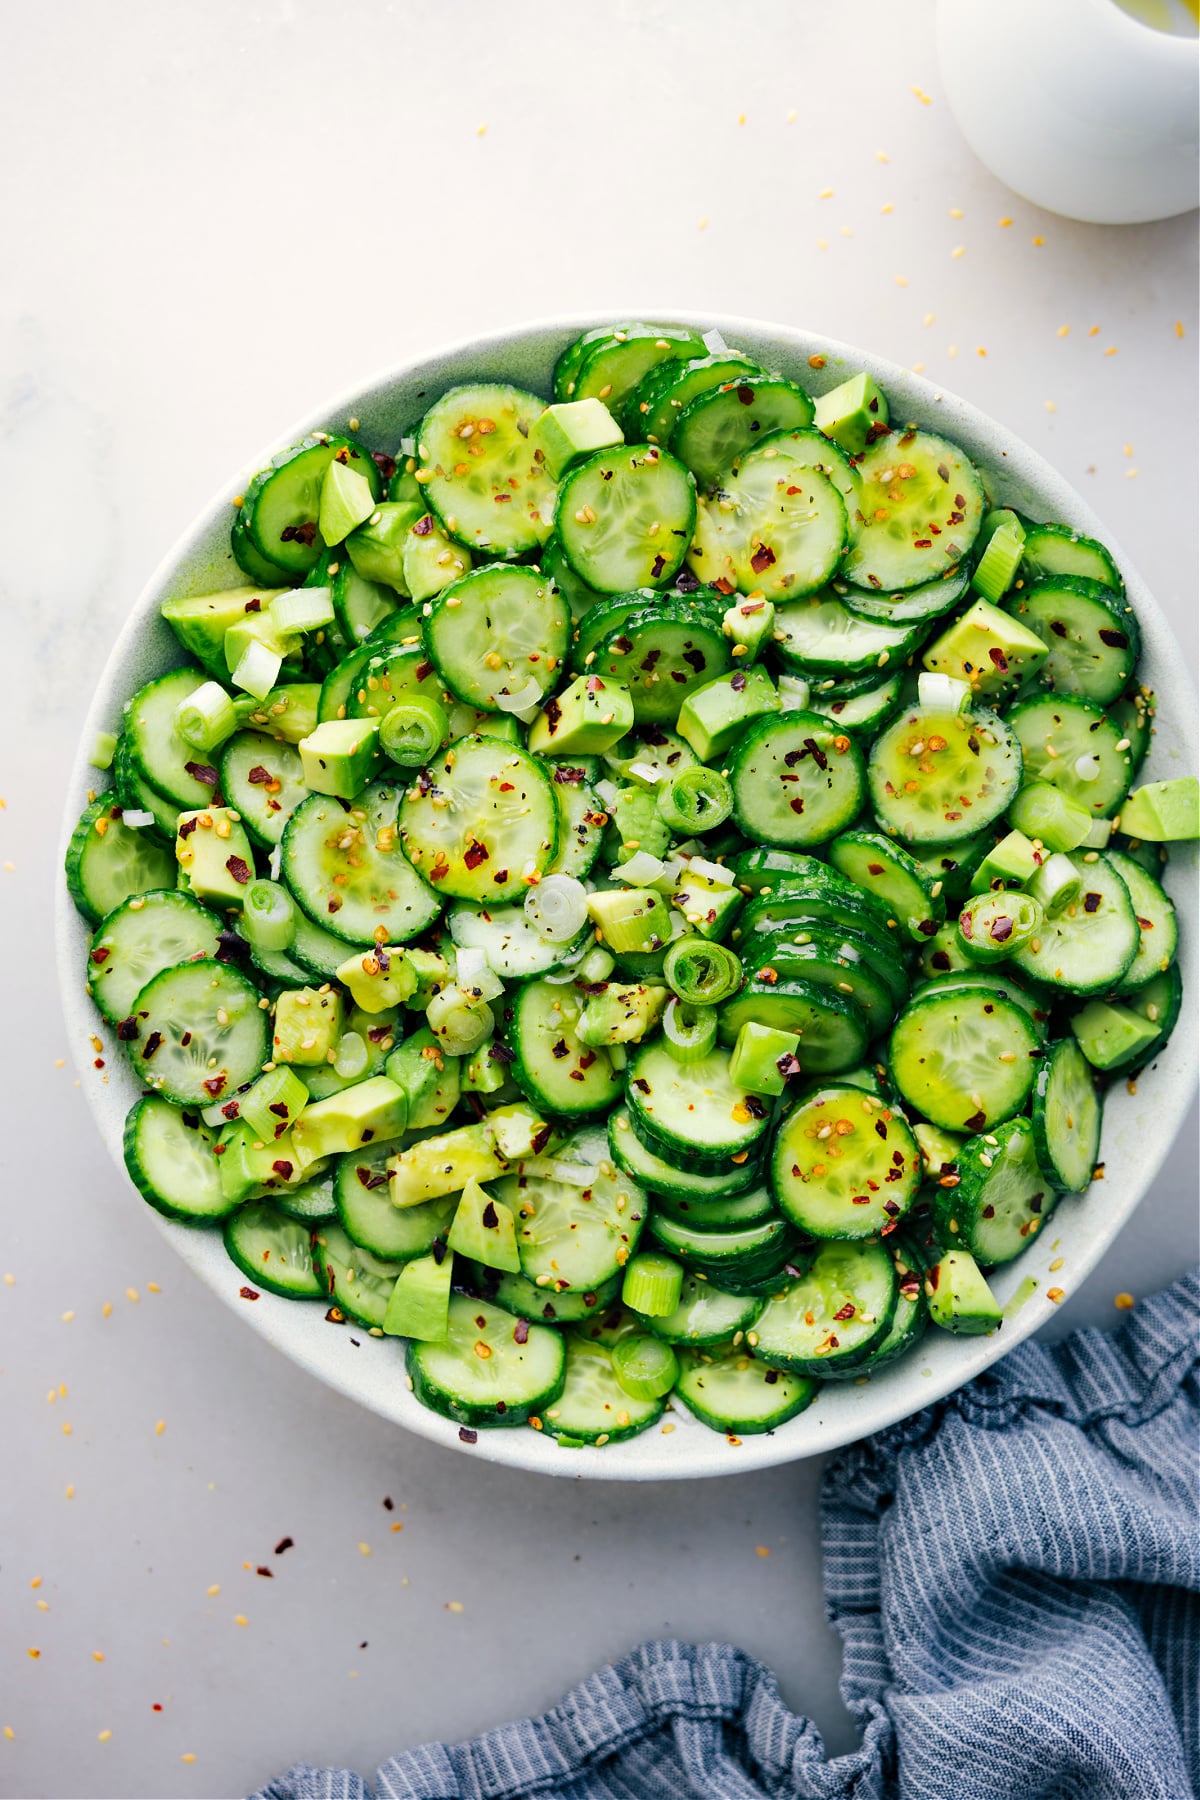 Asian Cucumber Salad in a bowl ready to be enjoyed.